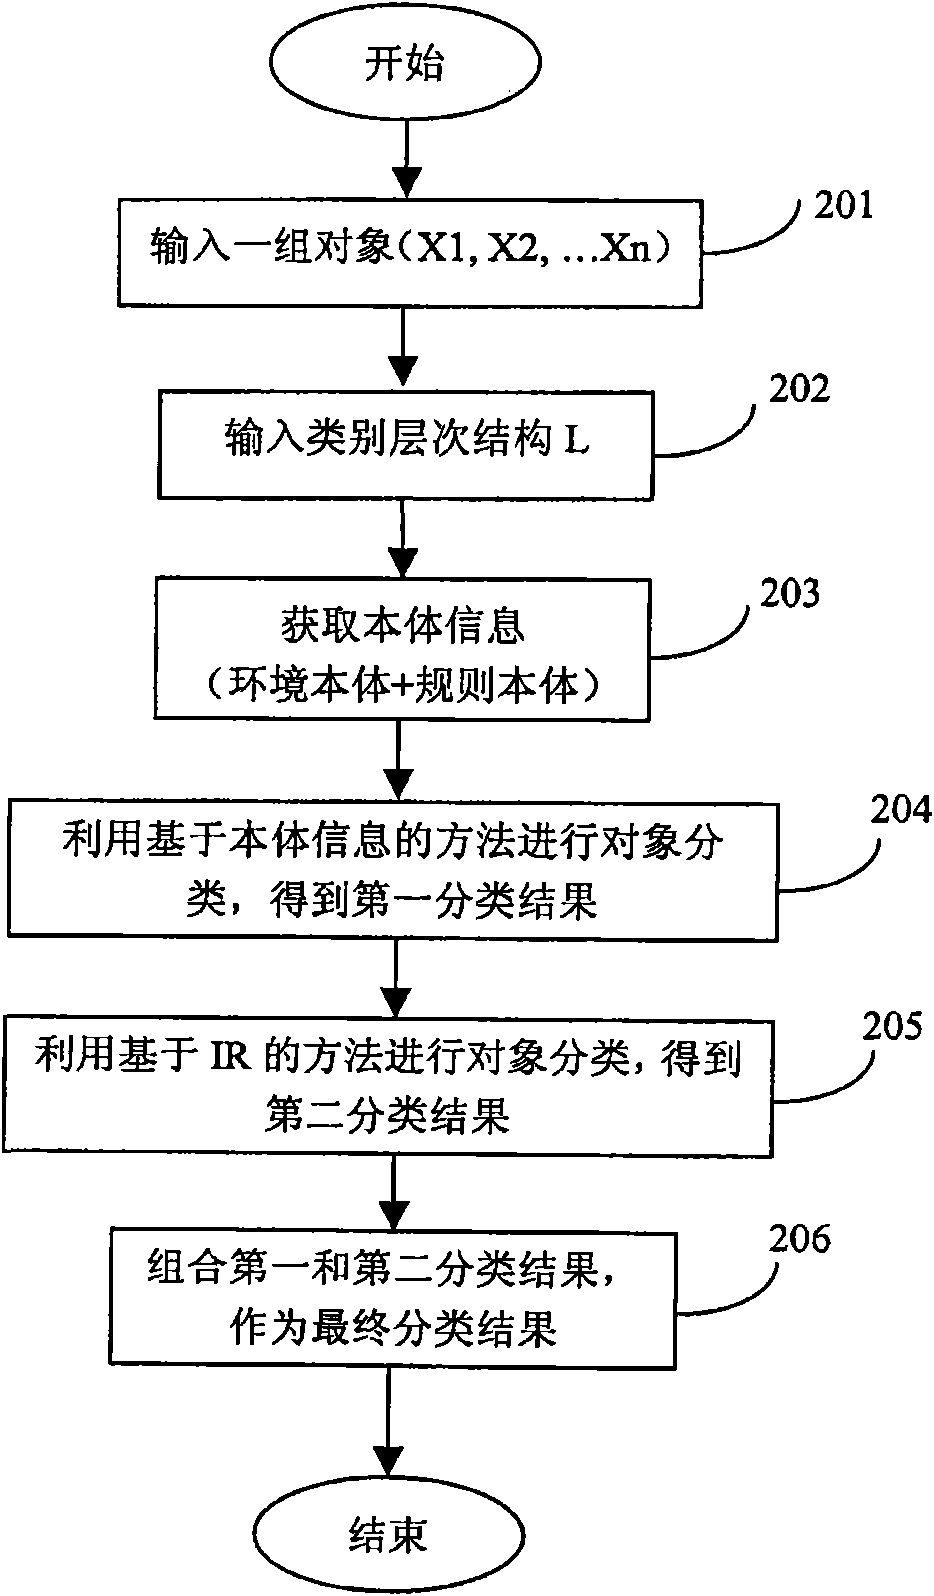 Method and system for automatically classifying objects